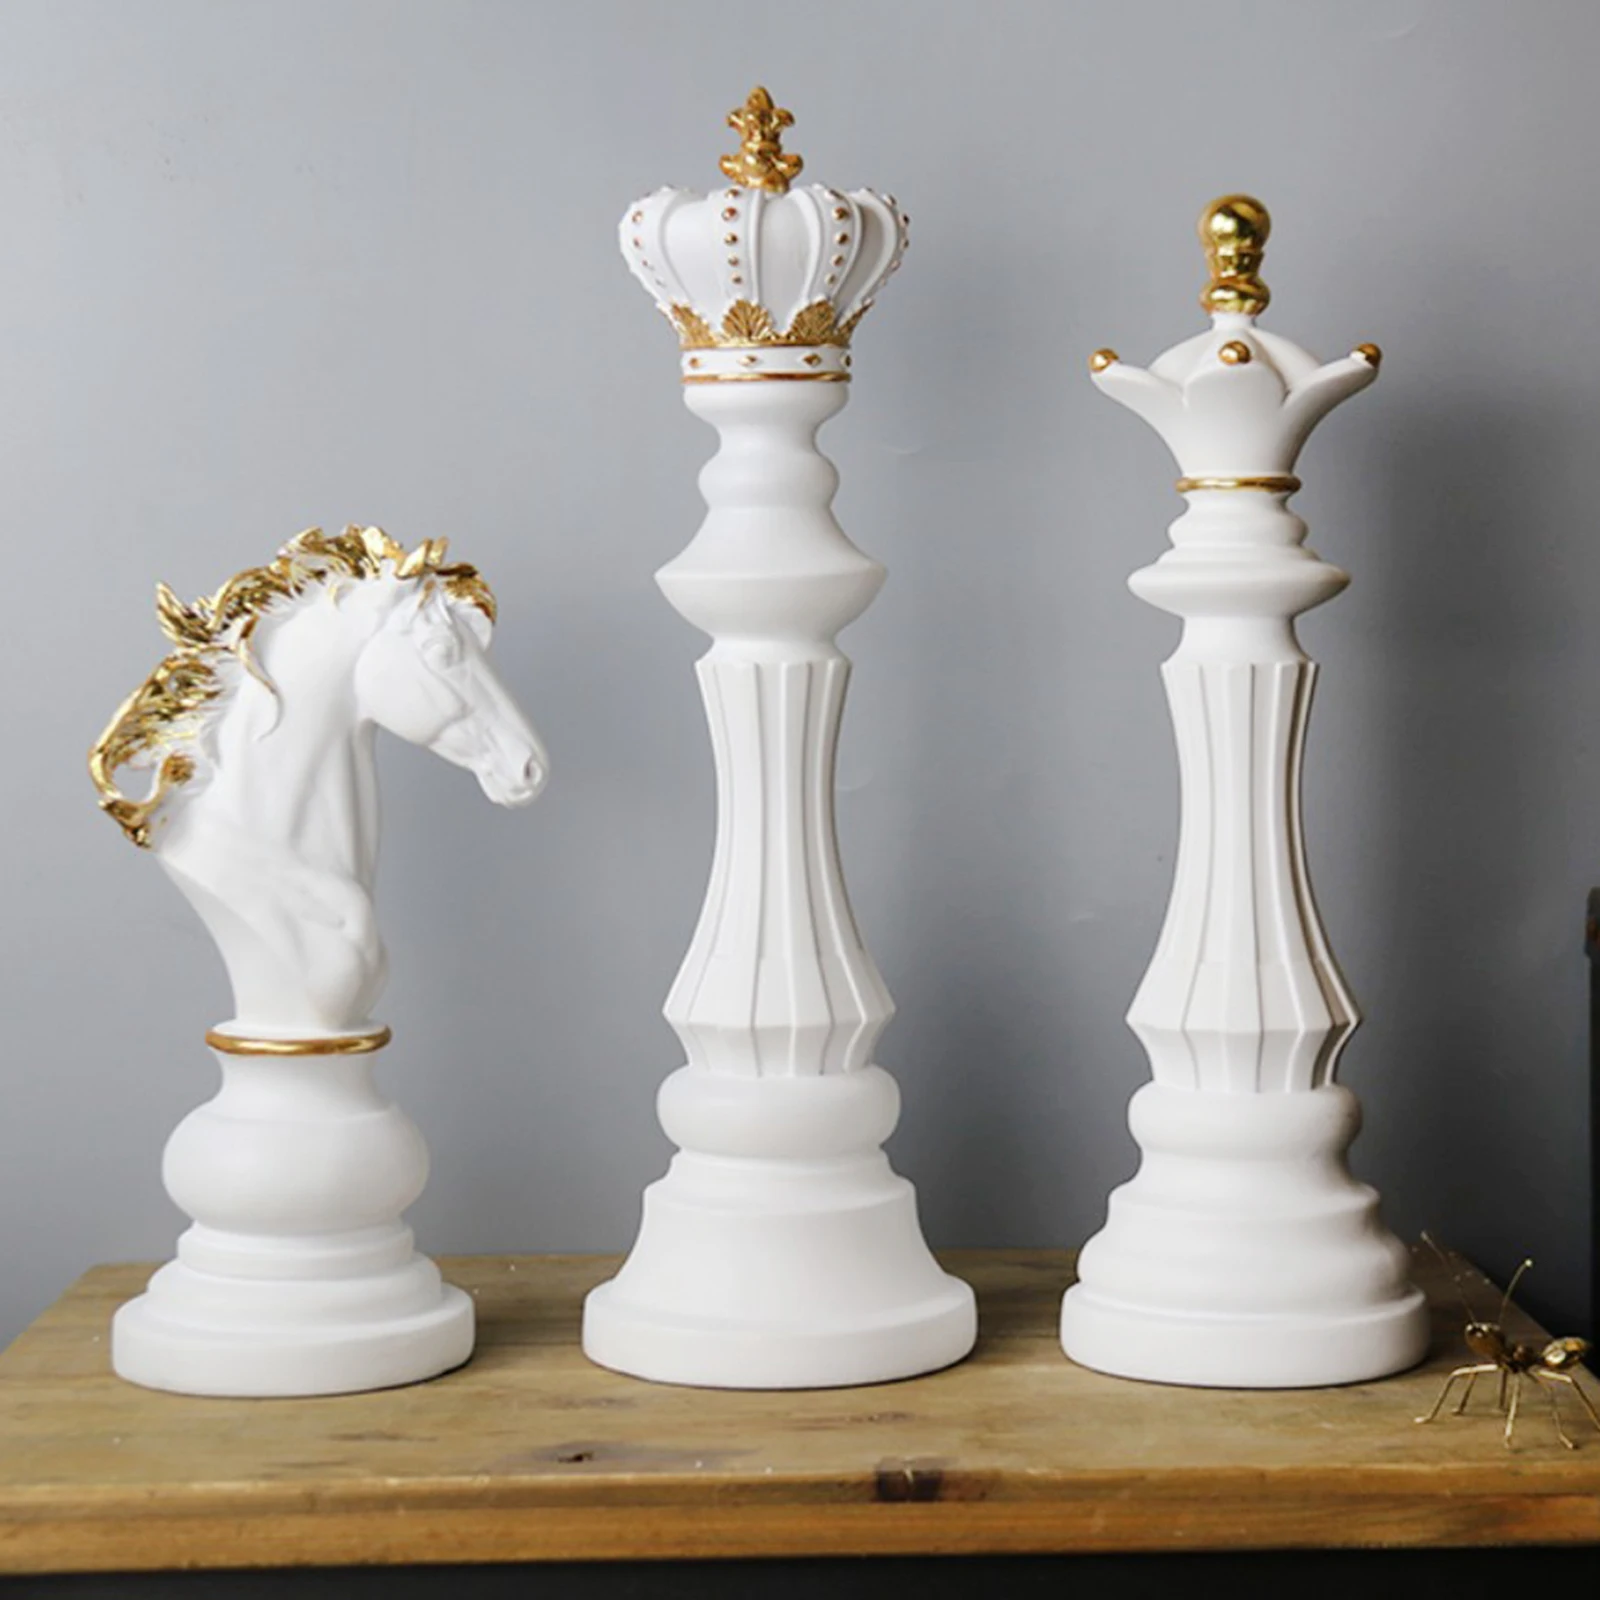 Details about   Resin Chess Pieces King Queen Knight Statues Figures Classic Figurines Decor 